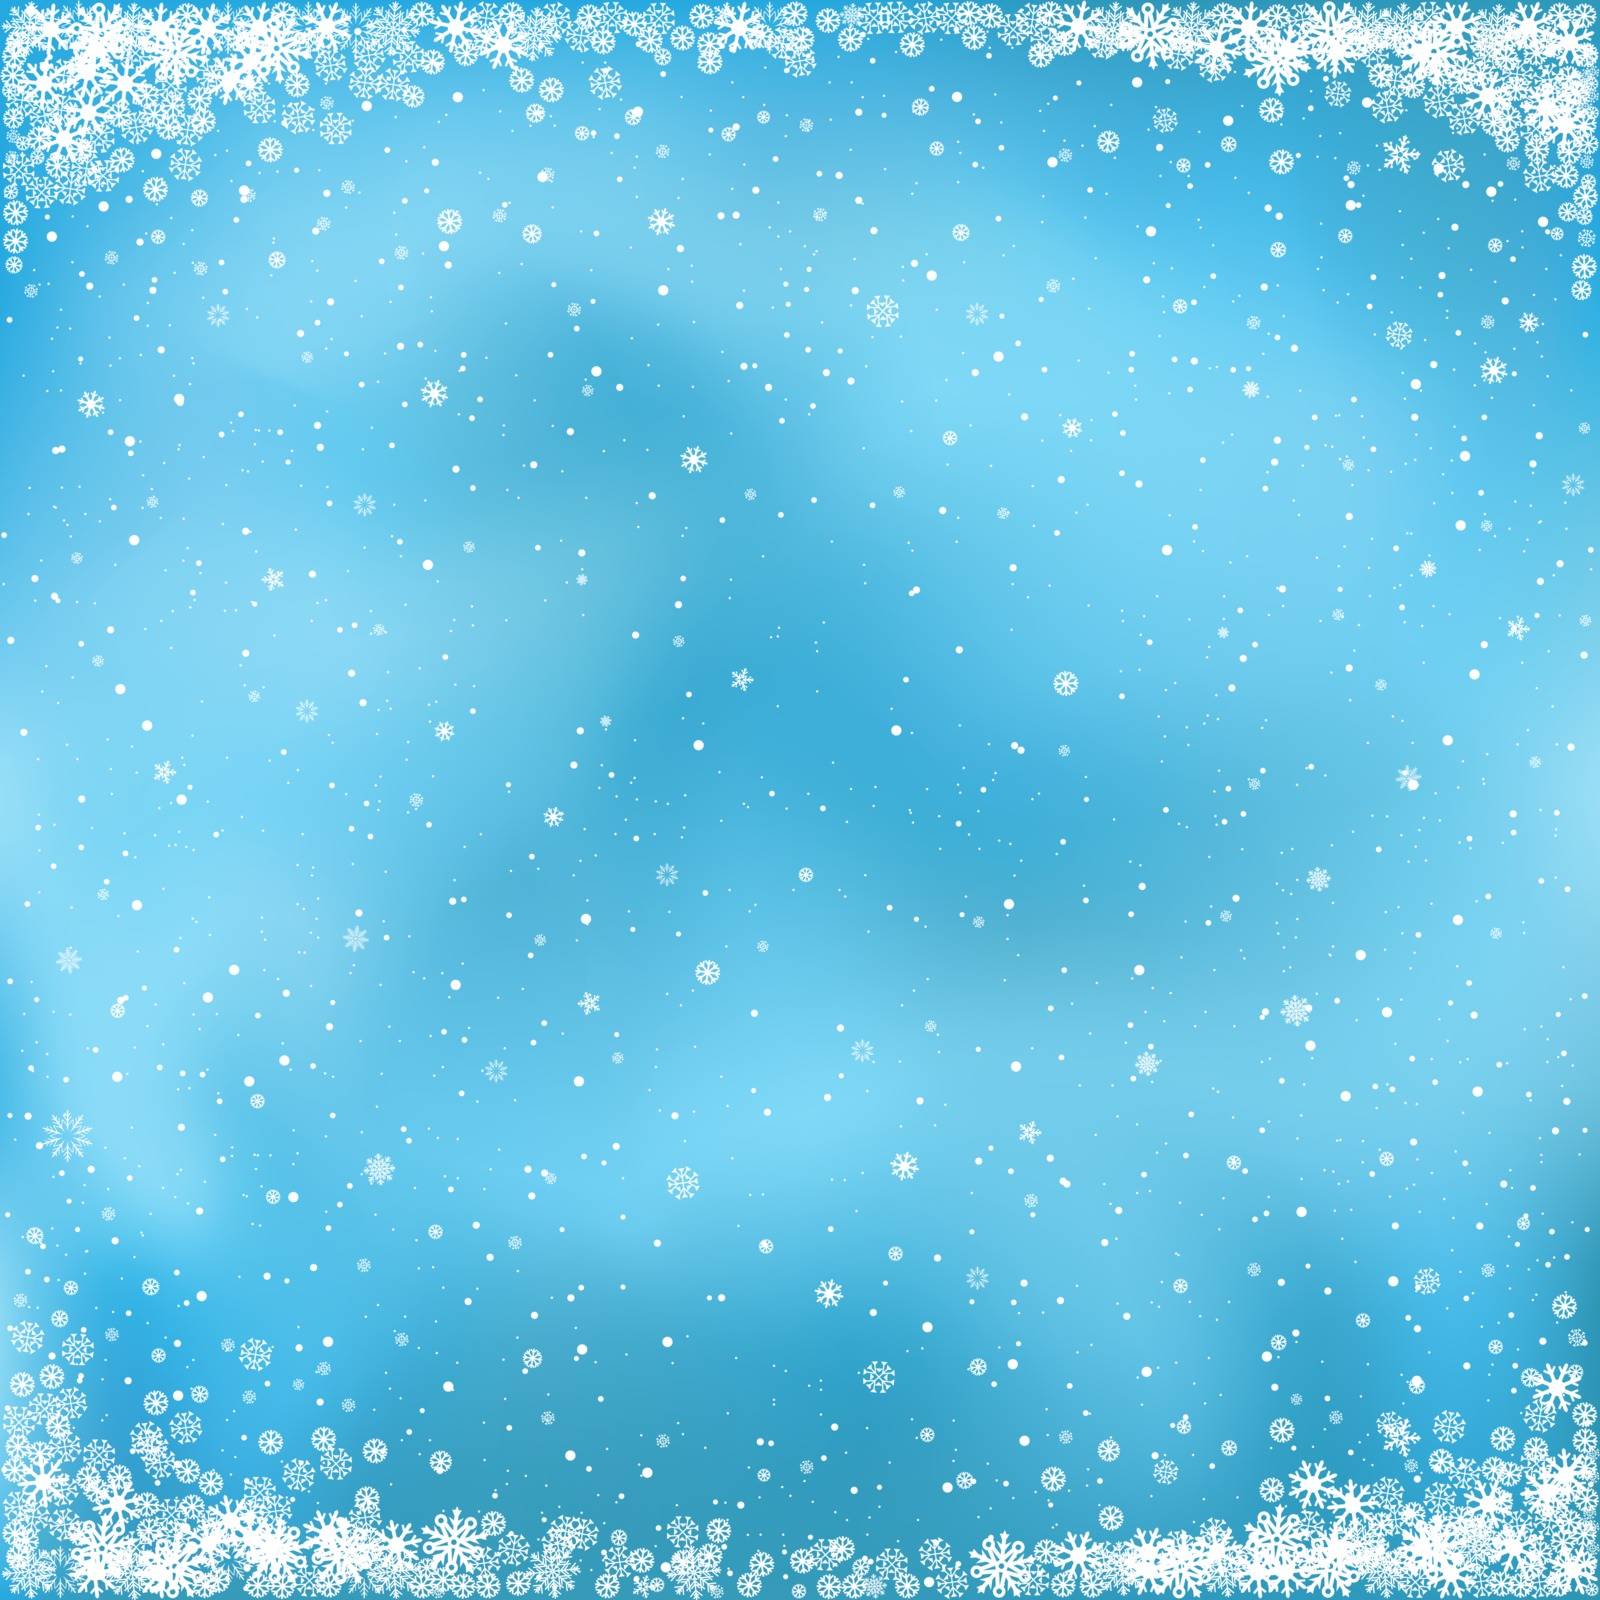 Christmas and winter clipart. The falling white snow on blue background. Easy to edit